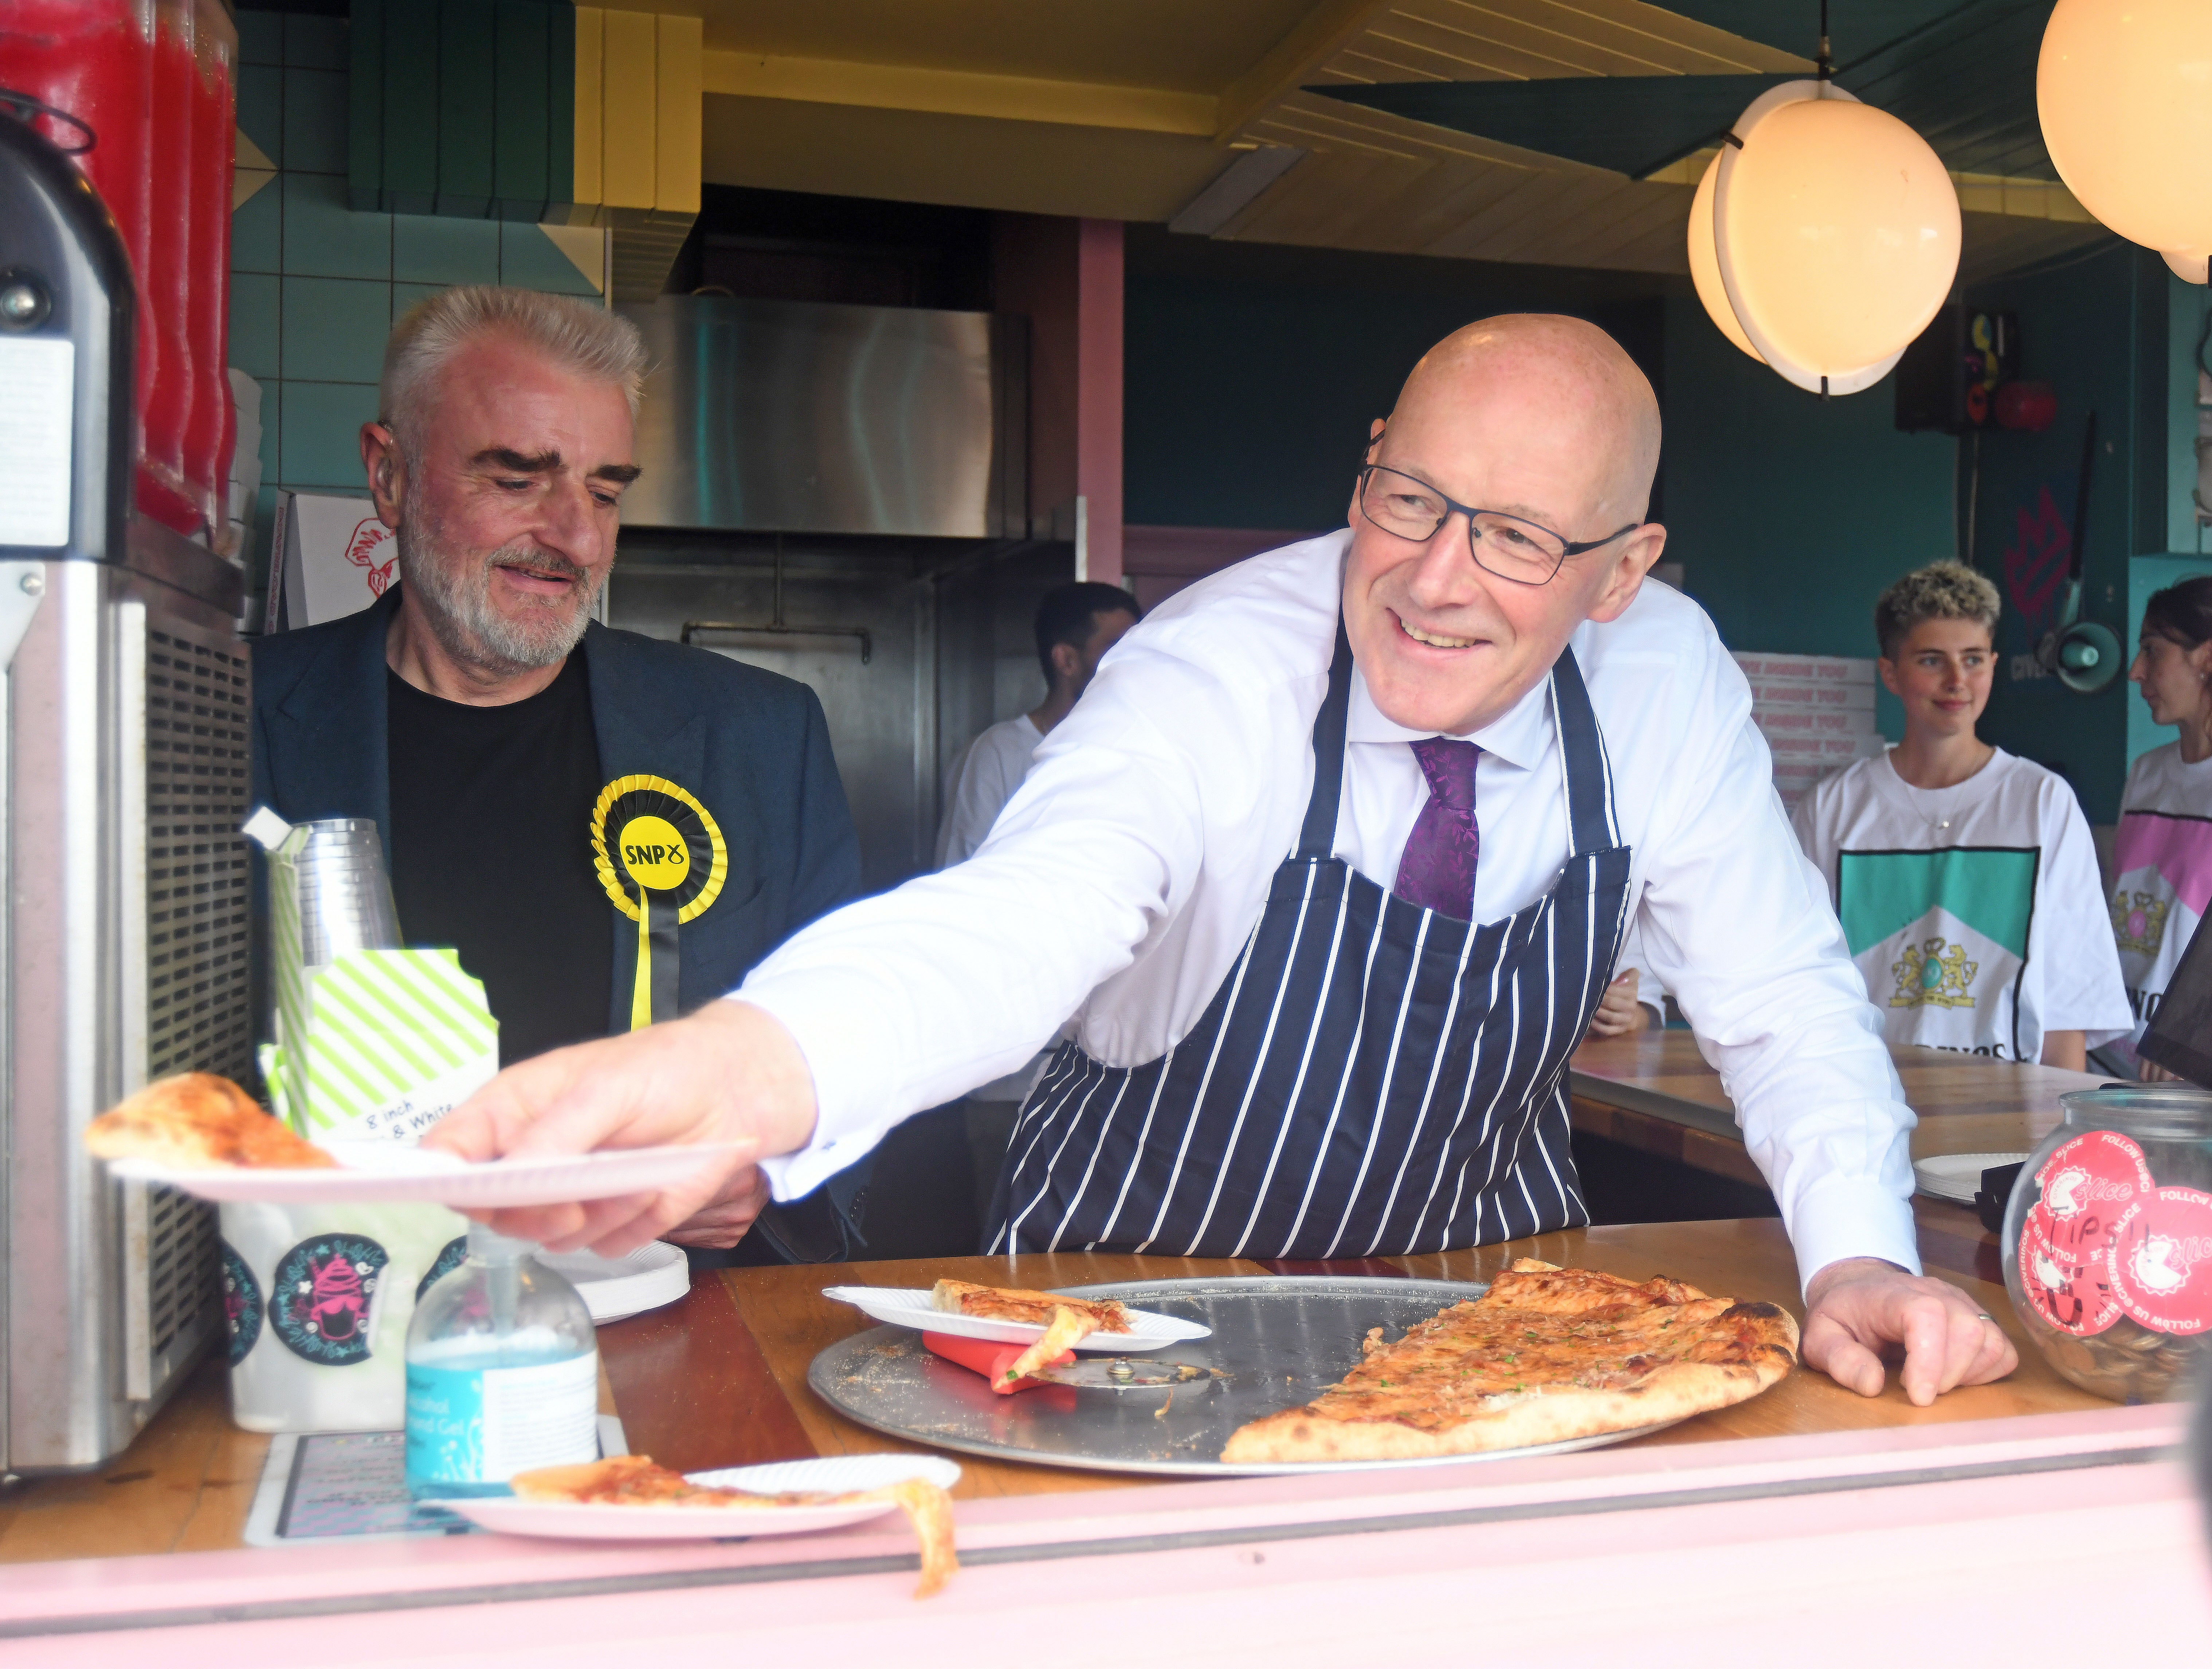 SNP Leader John Swinney (right) joins the SNP candidate for Edinburgh East and Musselburgh, Tommy Sheppard, serving pizza at Portobello Beach and Promenade,